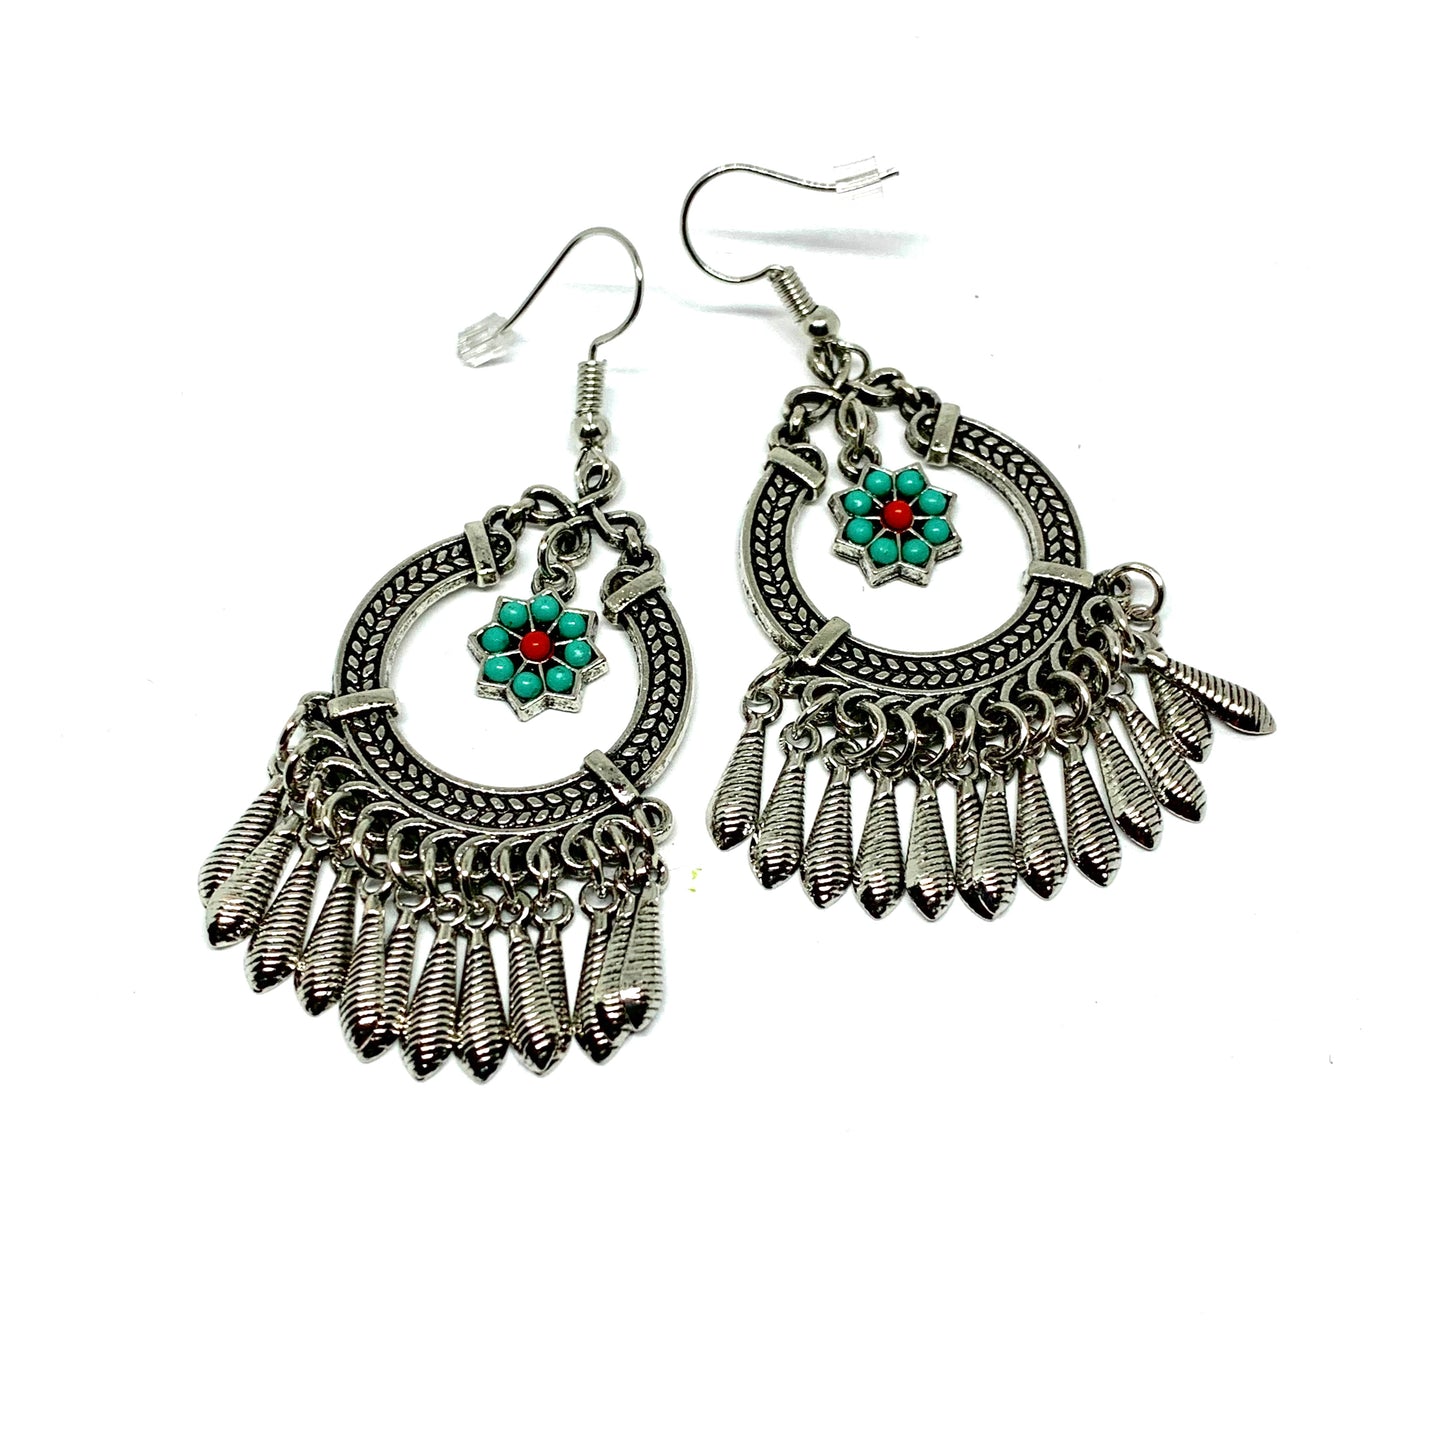 Mexican Silver tone chandeleir drop and dangle earrings with turquoise color beaded daisy flower for women. Mexican earrings. Mexican jewelry for fridamaniacs, fridalovers. Light weight statement earrings. Mexico folk art to wear.